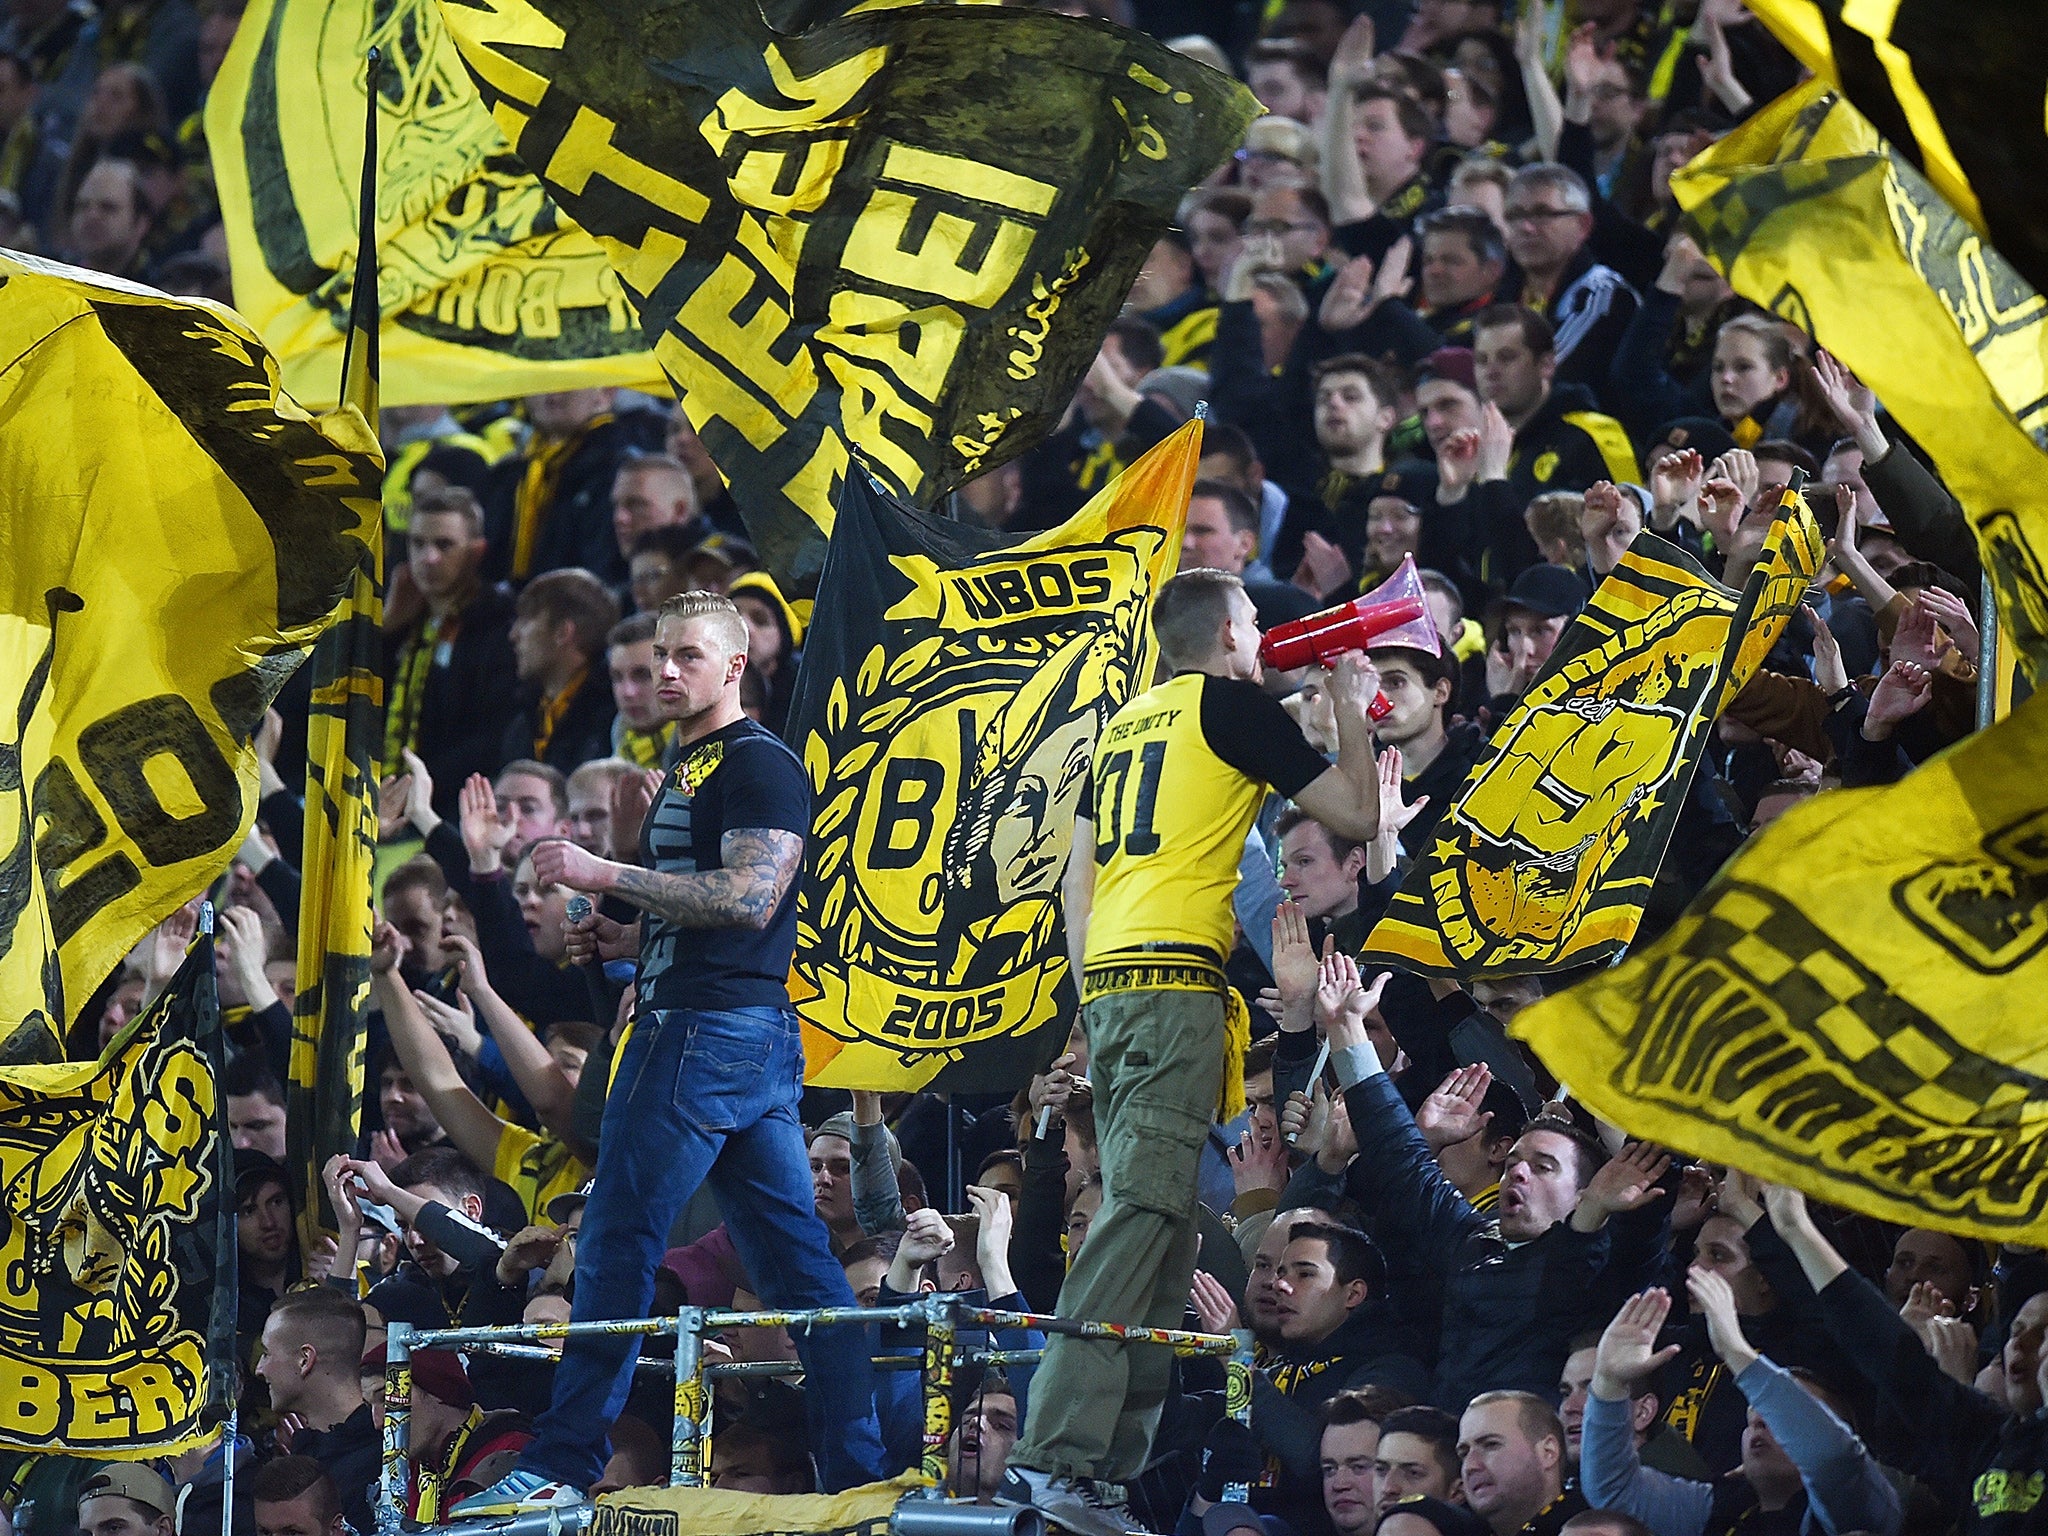 Borussia Dortmund supporters put on a display during last week's first leg against Liverpool